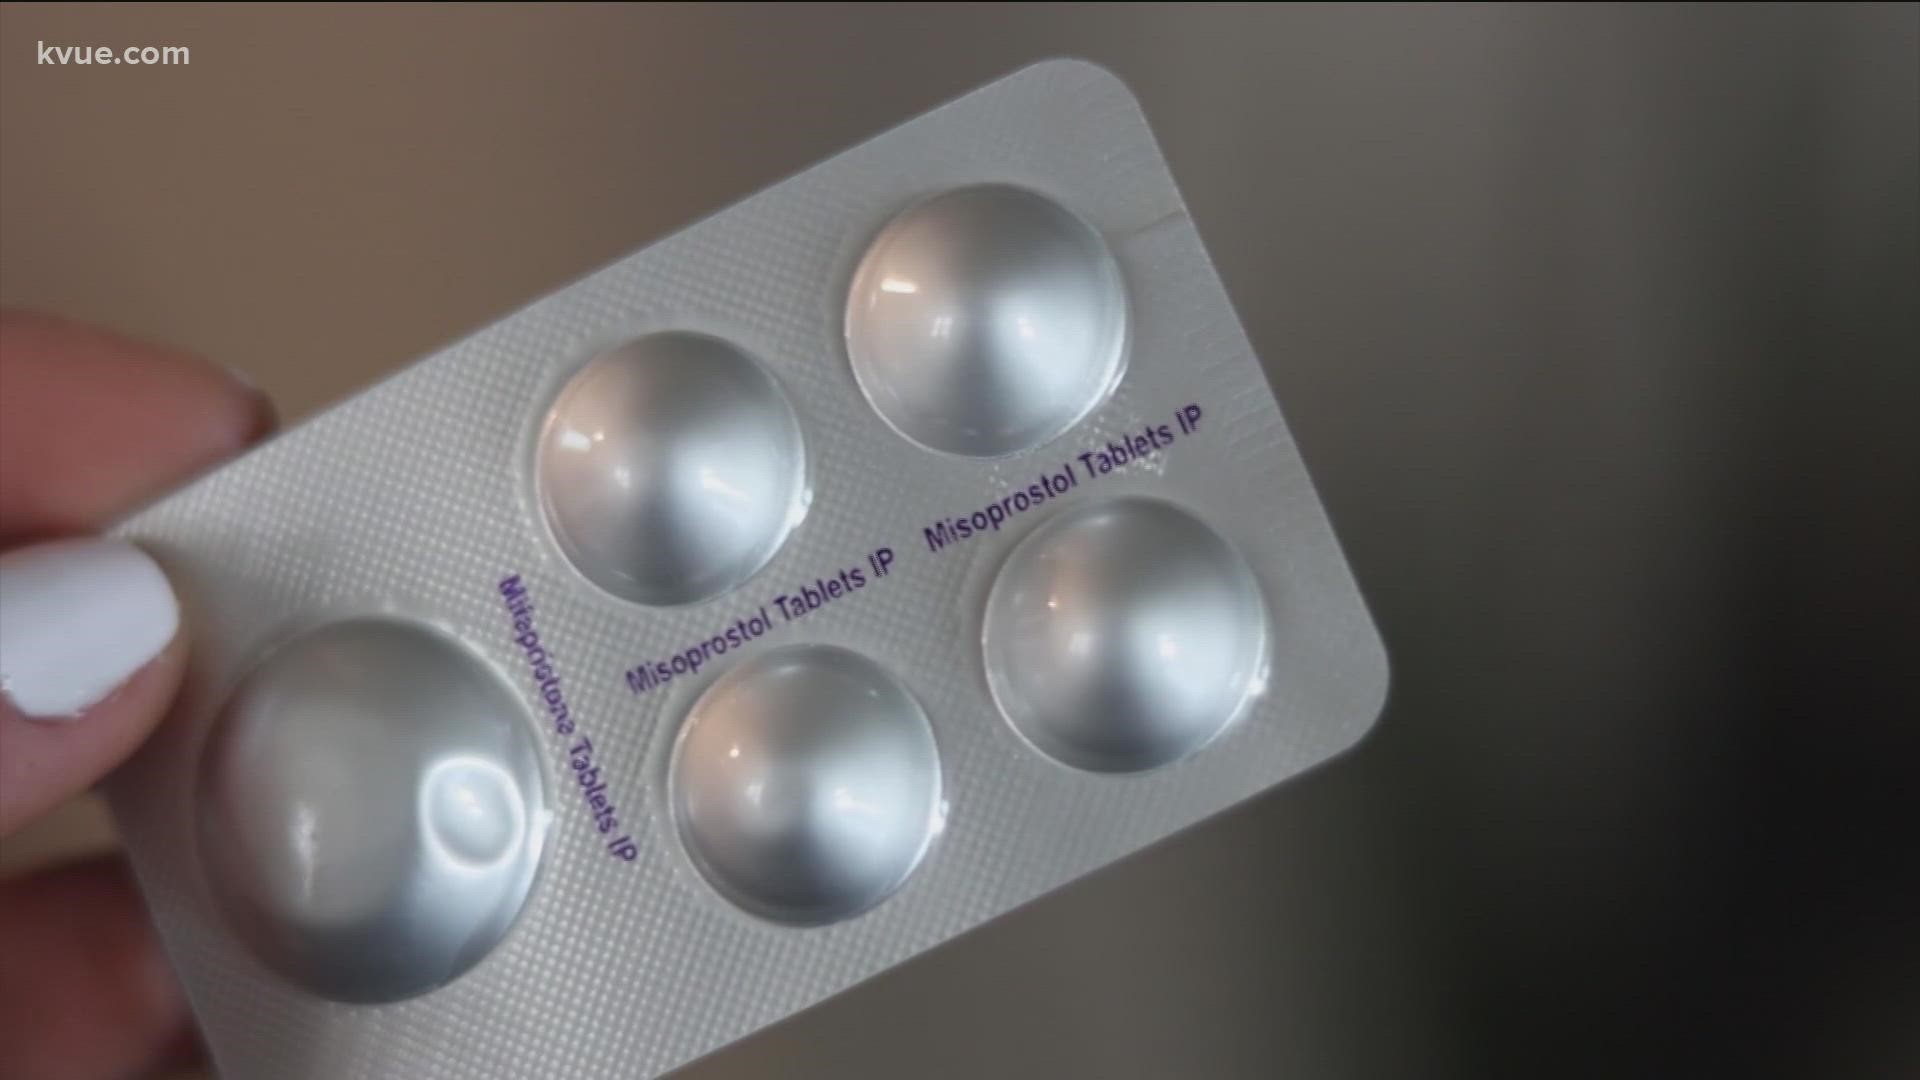 FDA now allows abortion pills to be sent by mail. However, because mailing abortion pills is illegal in Texas, state law trumps the FDA rule.